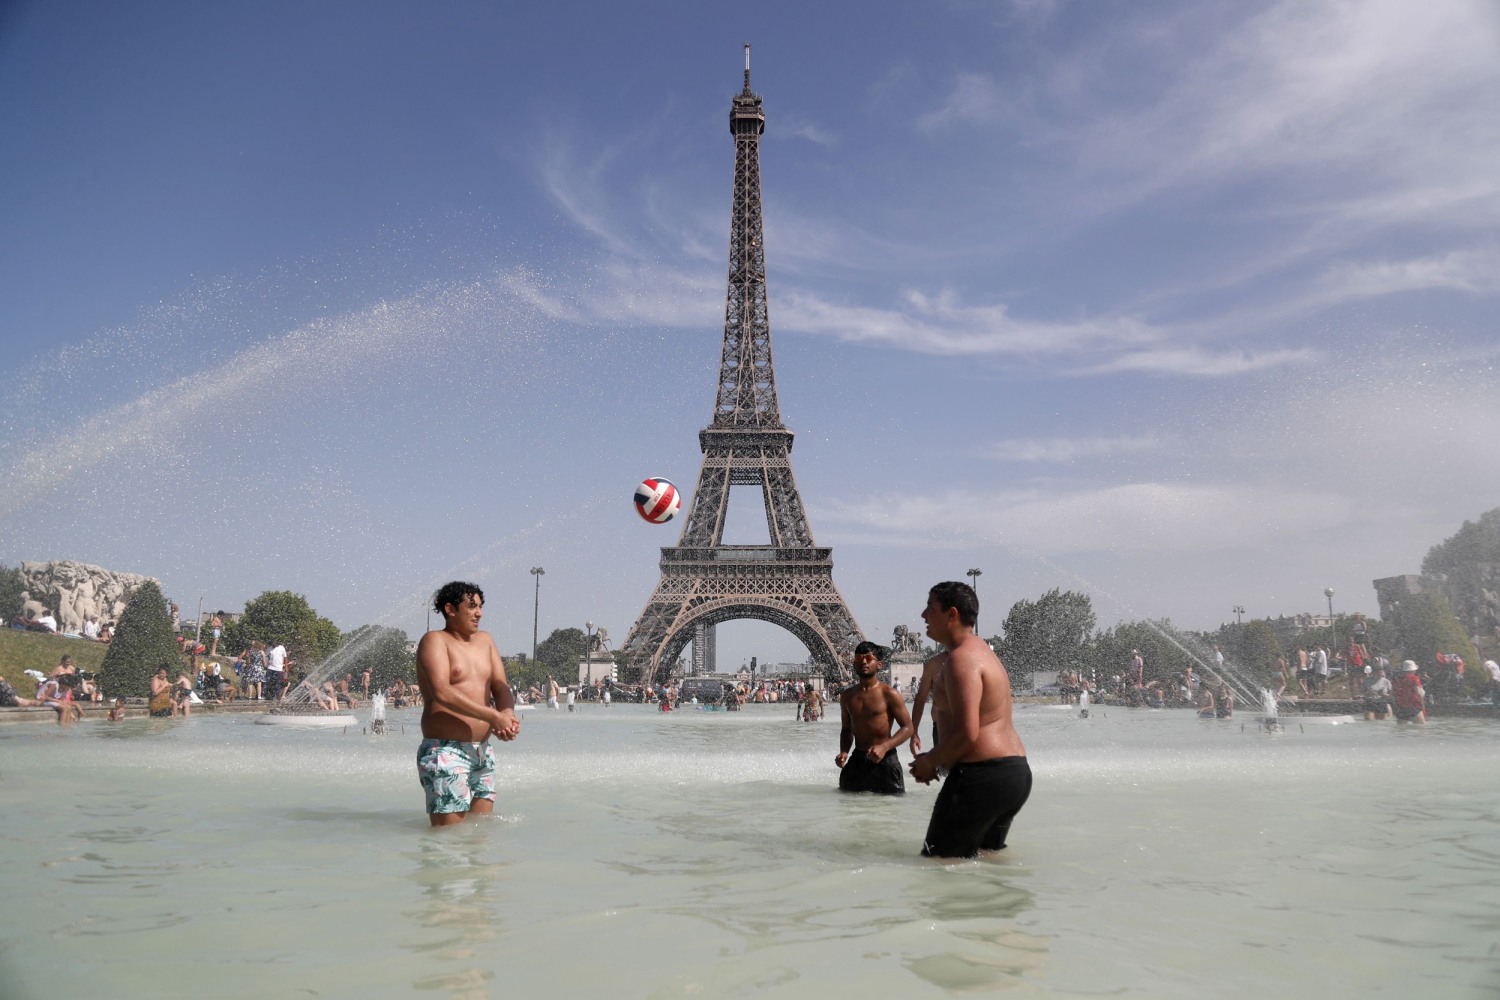 Up to 114 degrees in France Record-breaking heat in Europe forces tourists to adapt